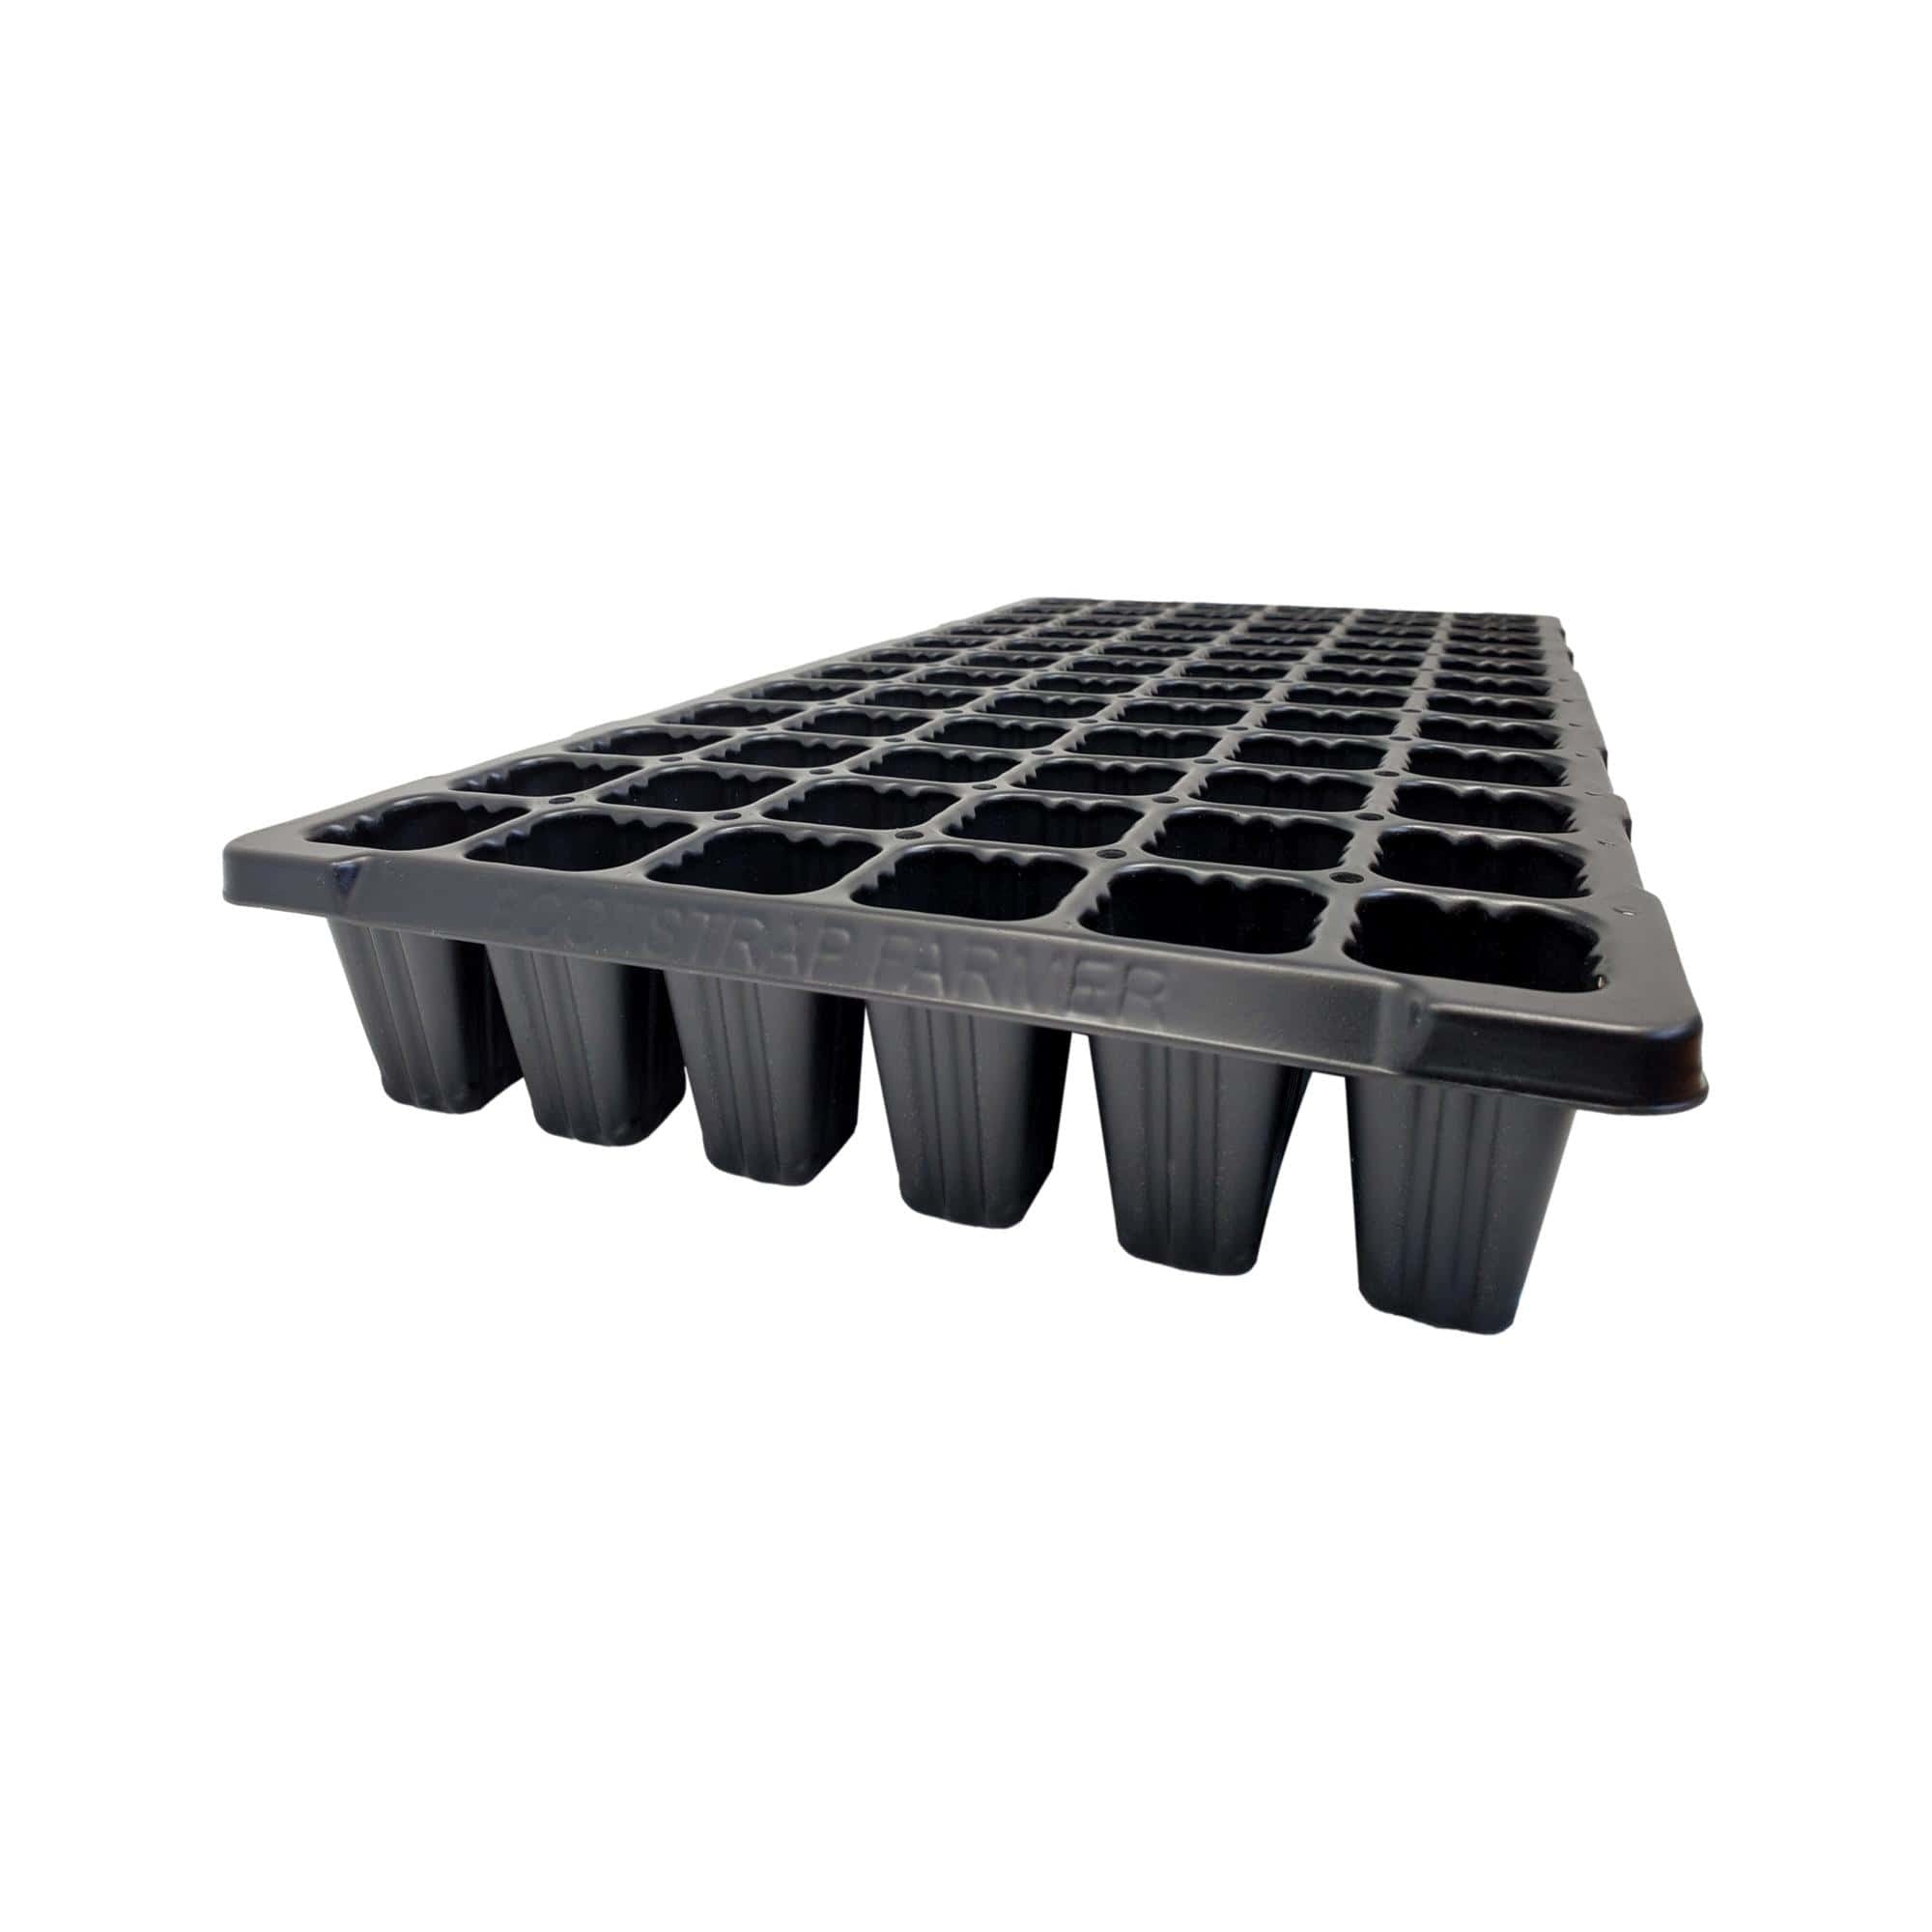 Single Pack Silicone Seed Starter Tray For Seed Germination And Plant  Propagation, Reusable Seedling Starter Tray With Drainage Holes- Green